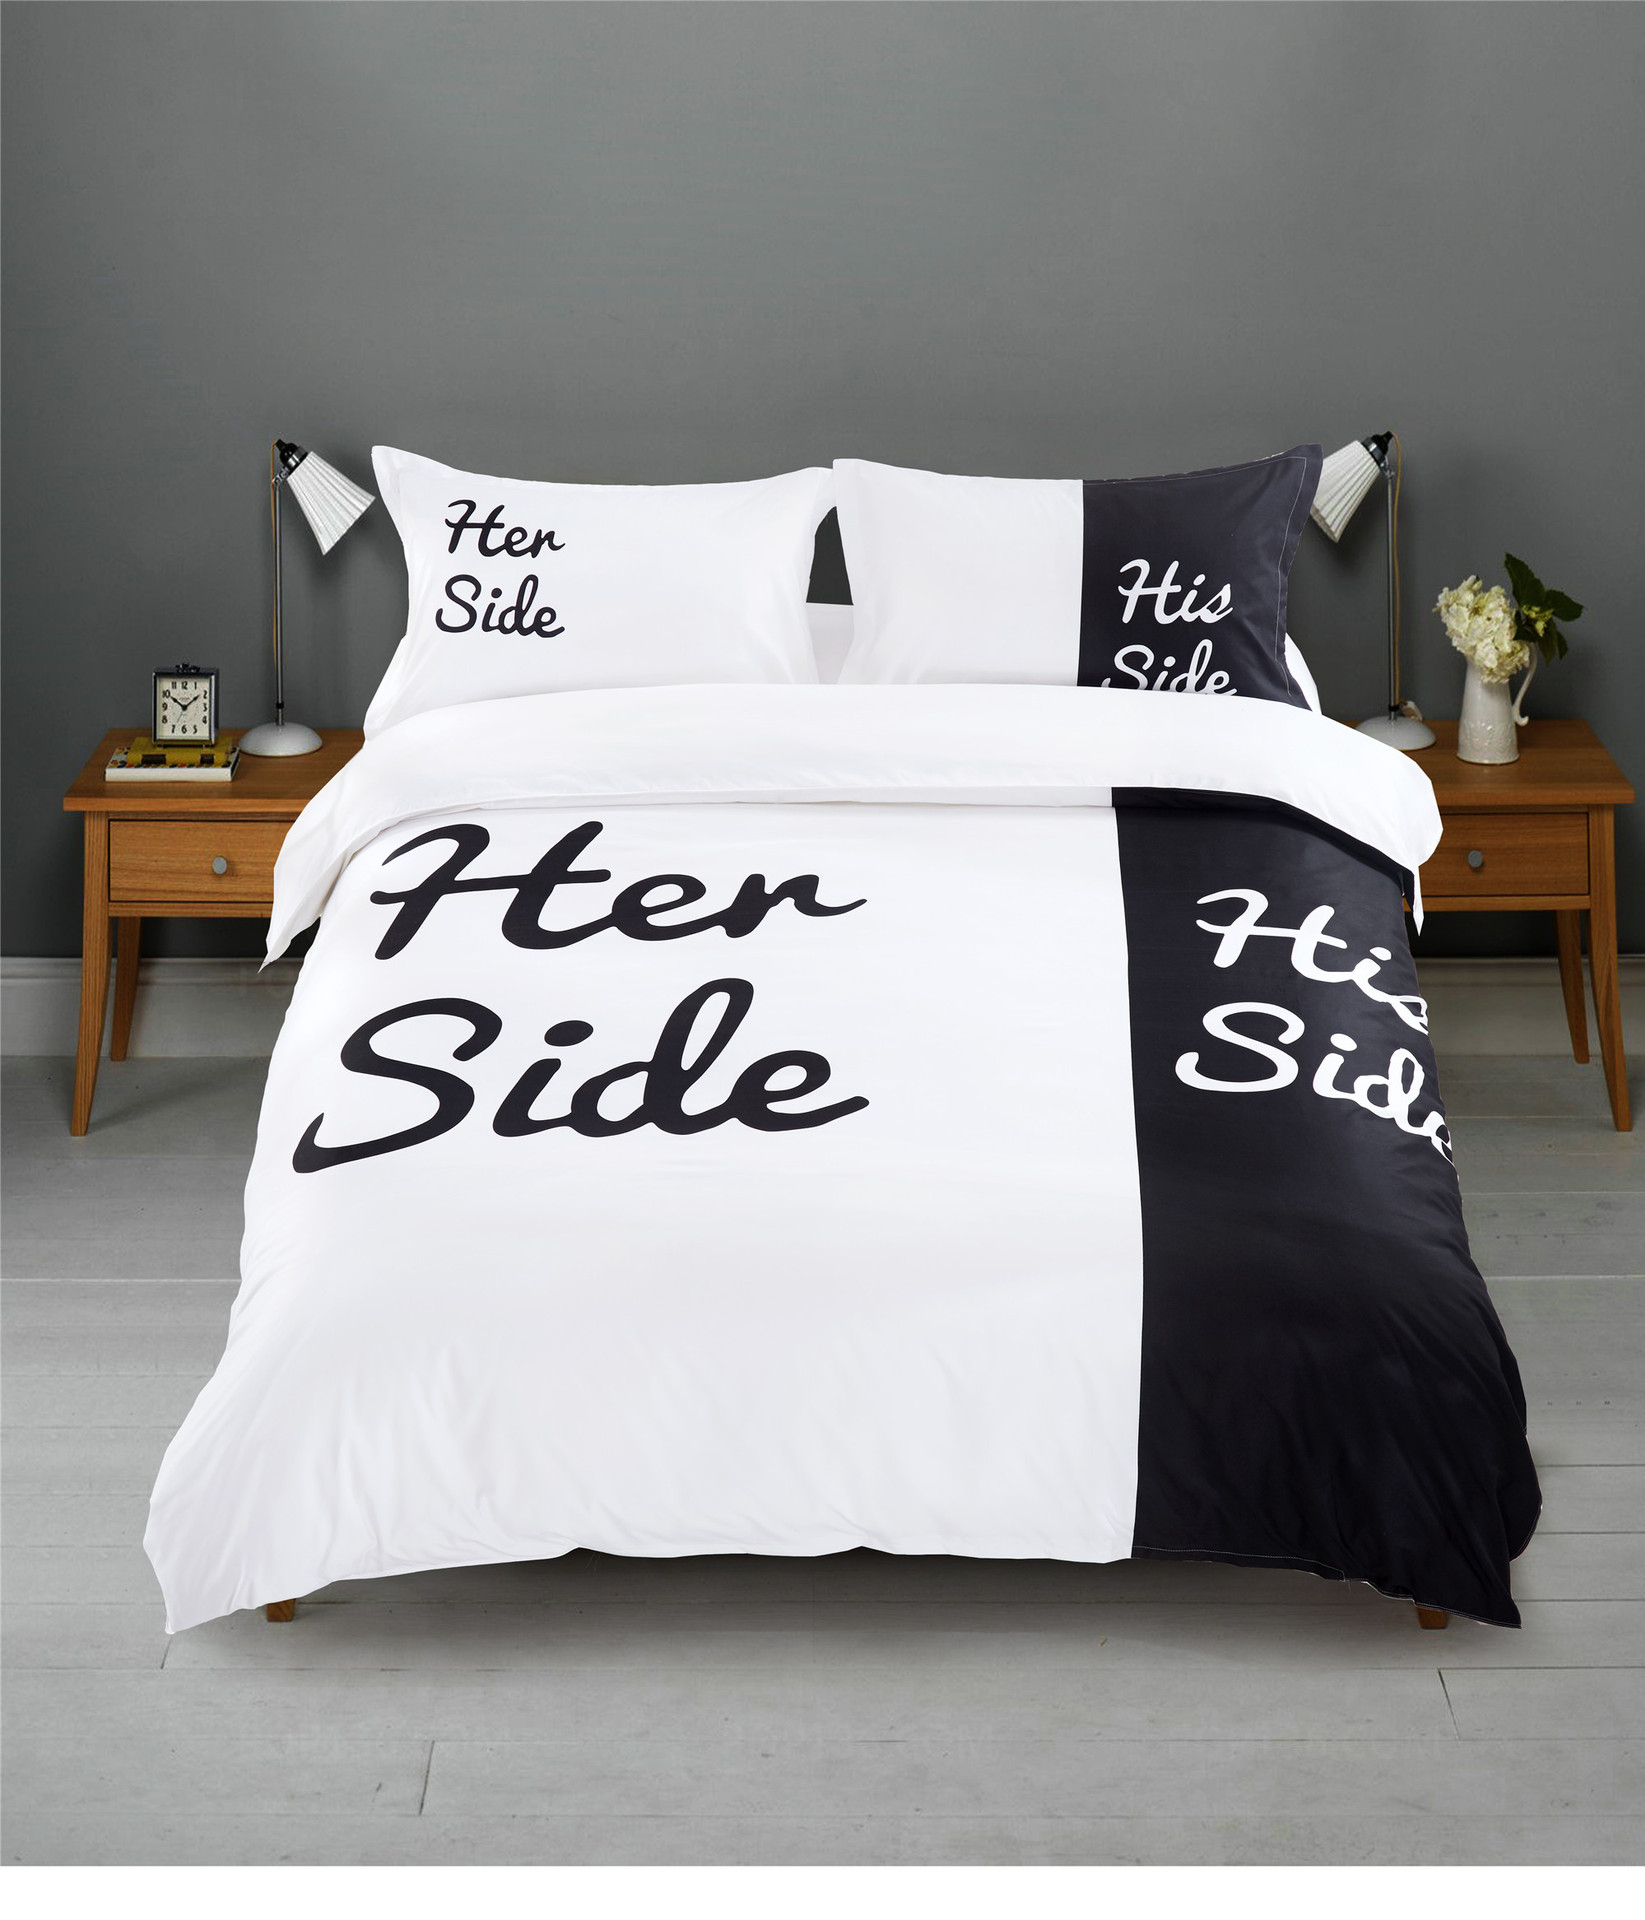 Letter Print Duvet Cover Set King Queen Size Bed Sheet Bedding Set Sexy Herside Hisside Black White Bedroom Bed Linen throughout sizing 1645 X 1920